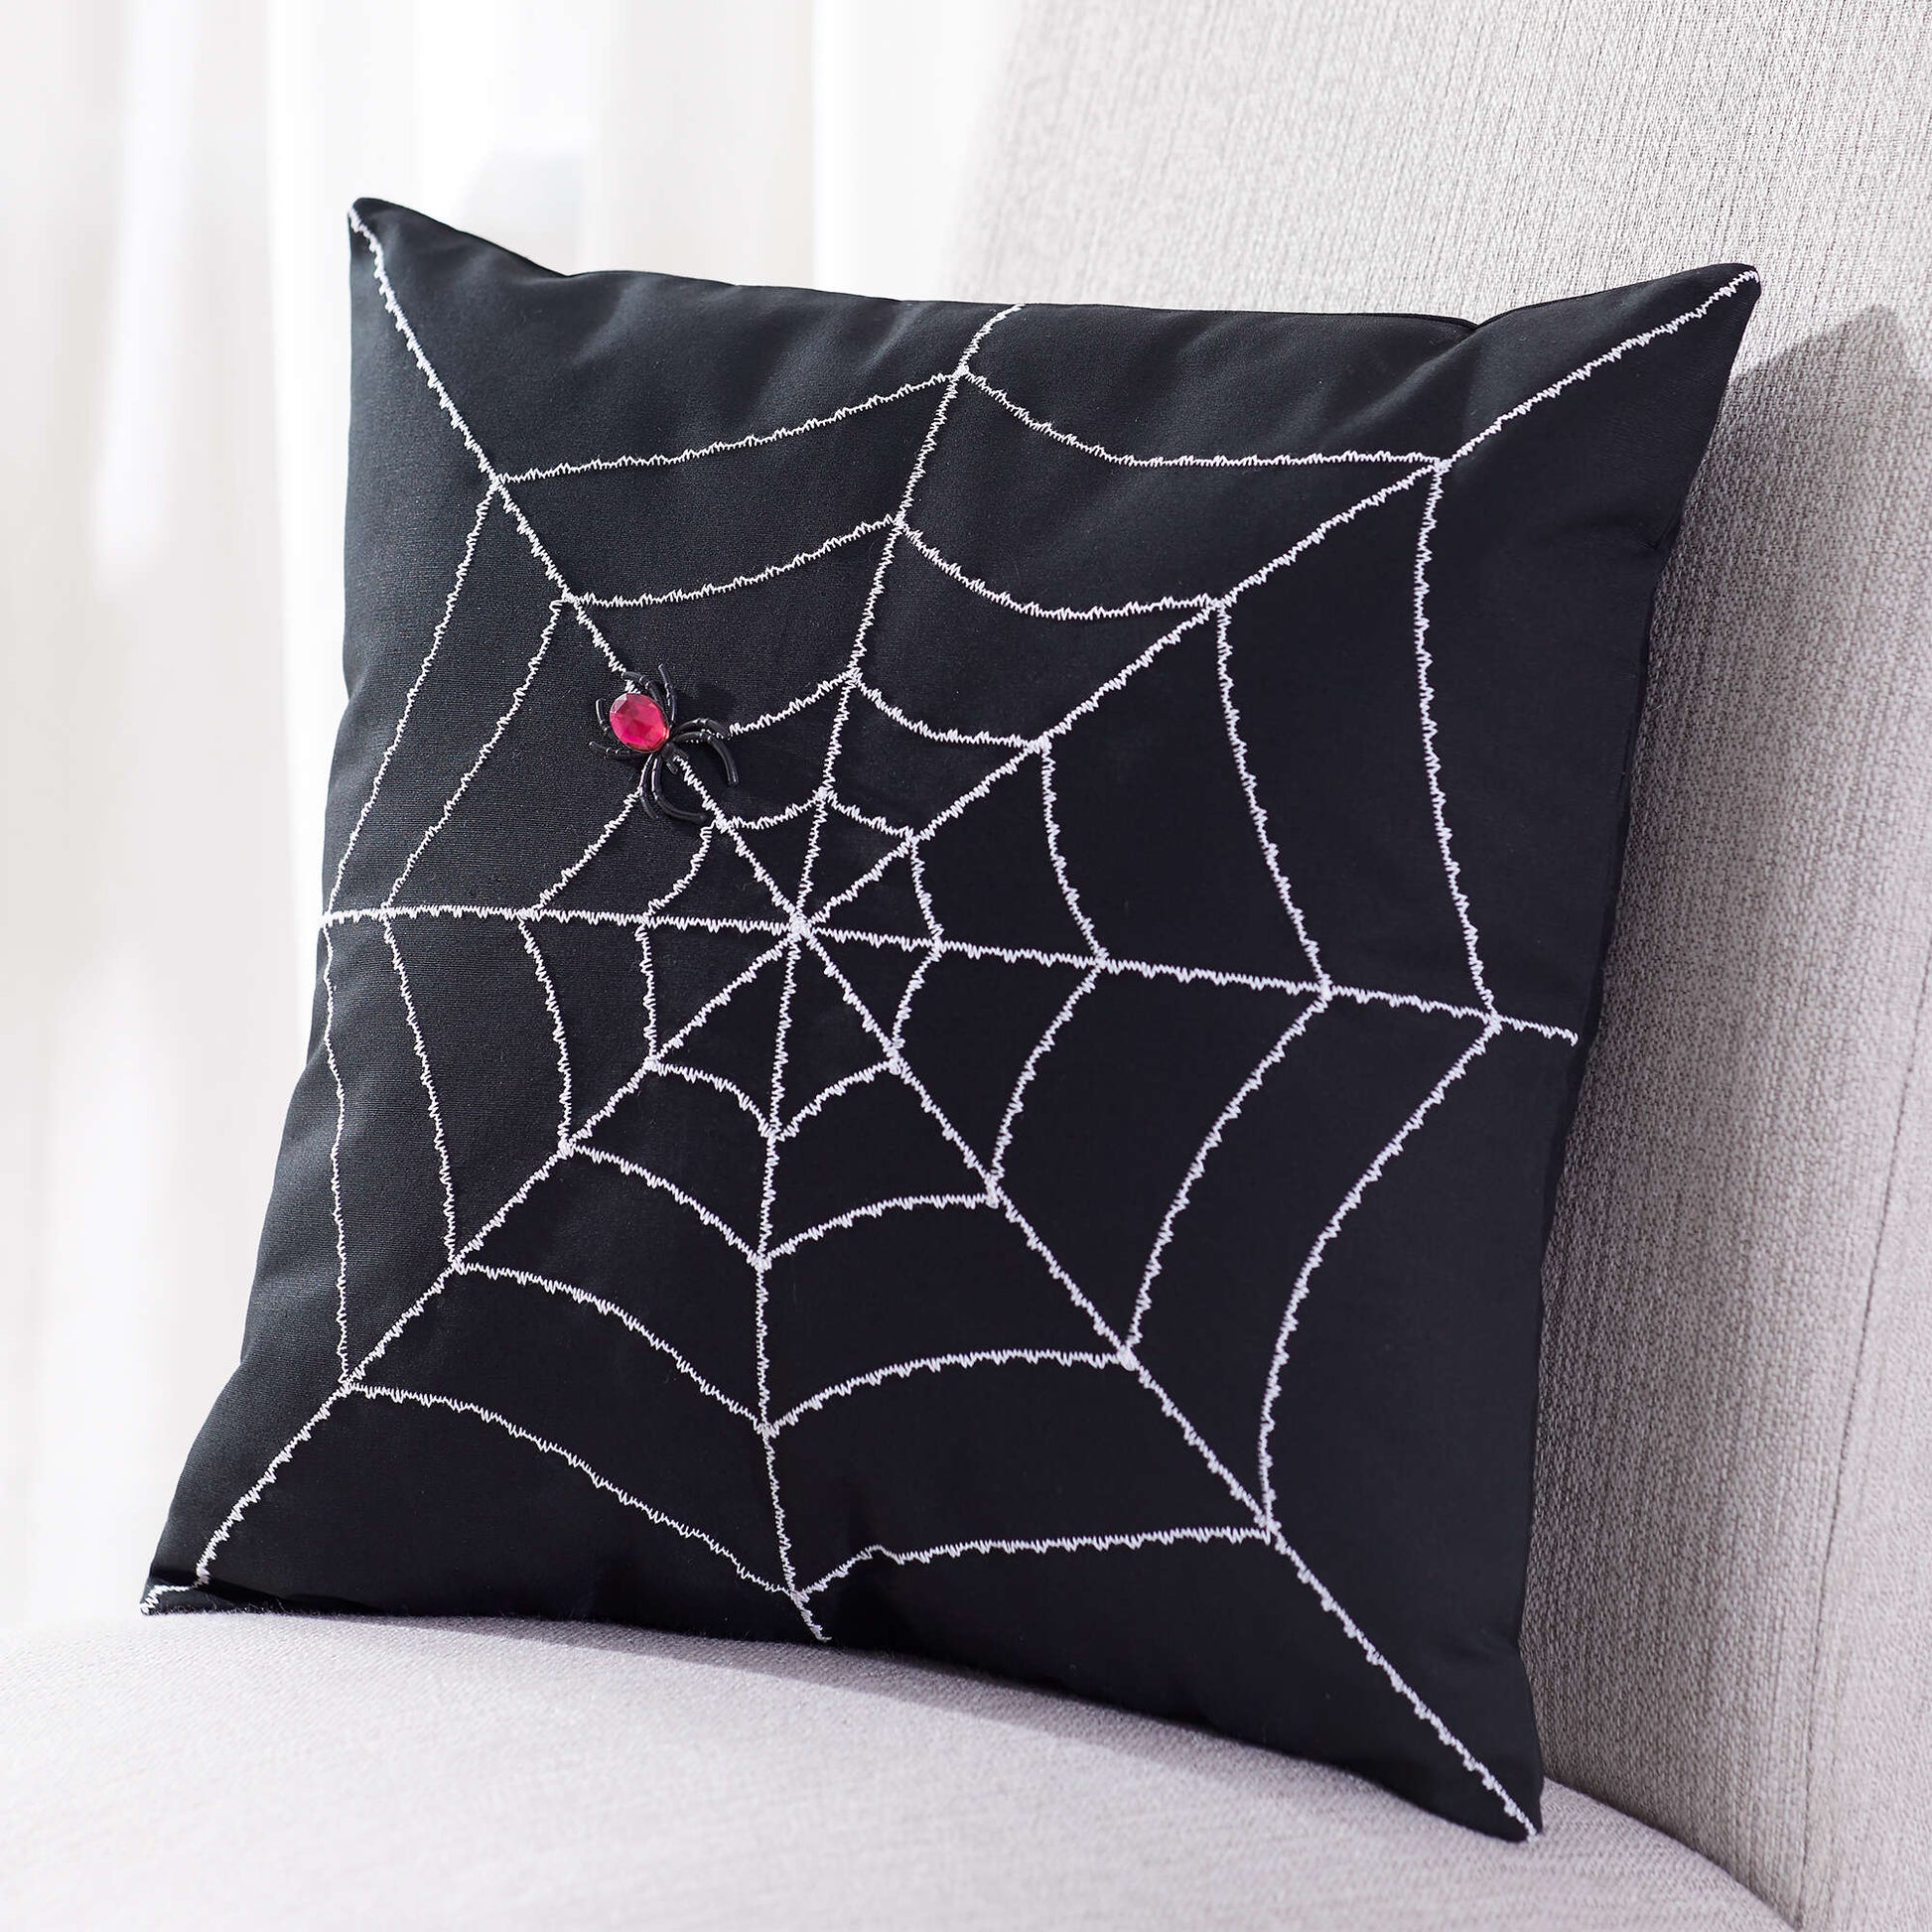 Free Coats & Clark Spider Web Pillow Sewing Pattern